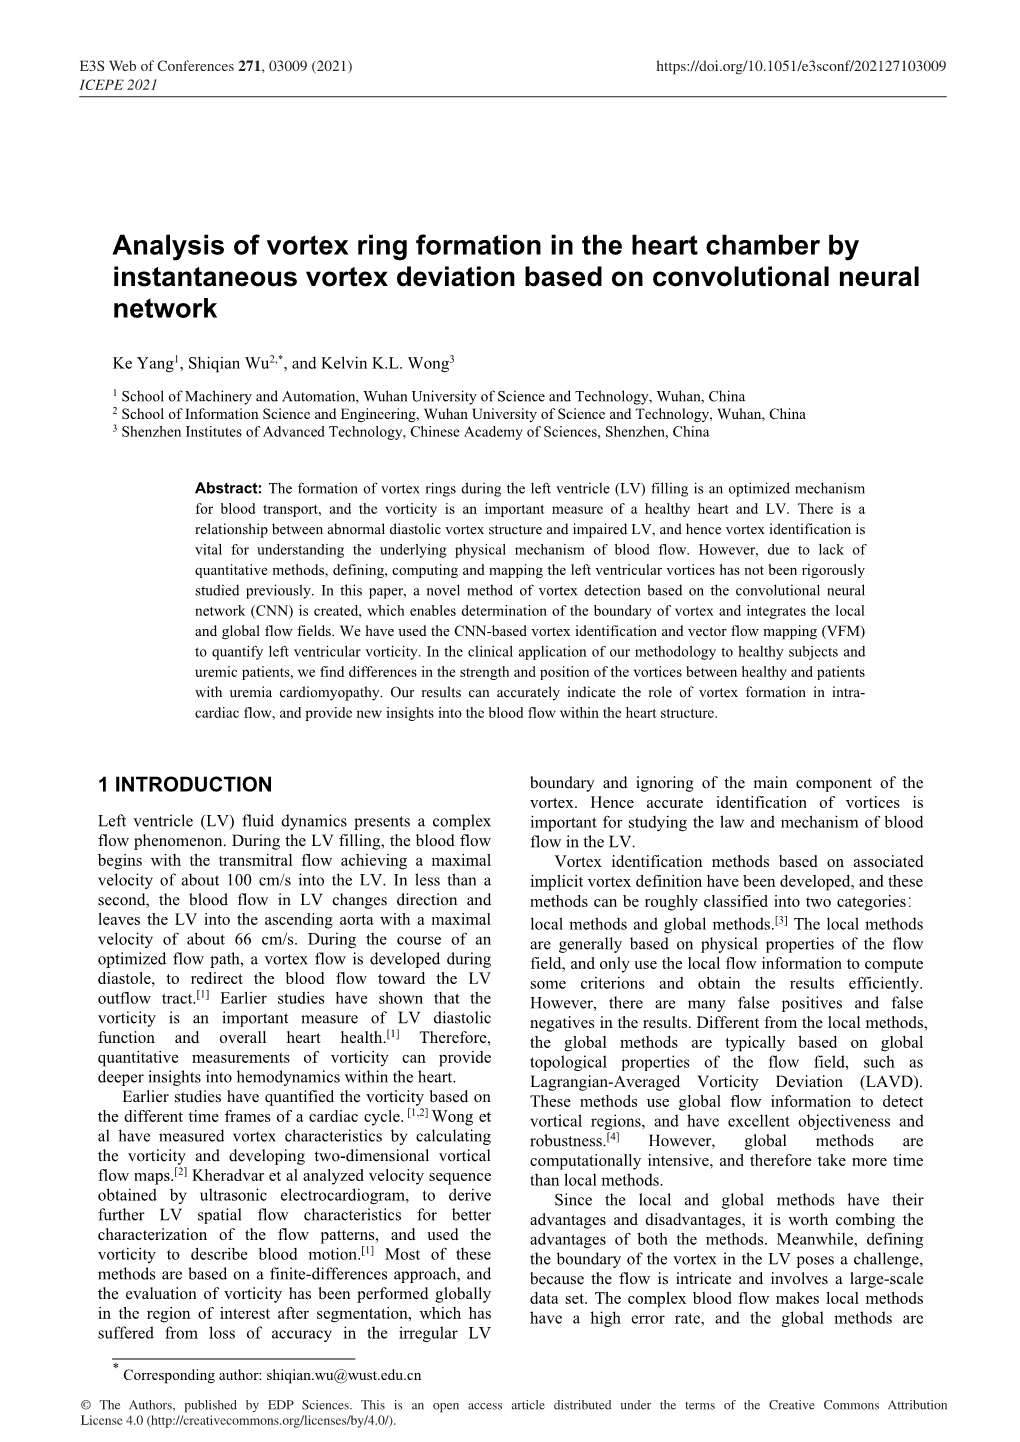 Analysis of Vortex Ring Formation in the Heart Chamber by Instantaneous Vortex Deviation Based on Convolutional Neural Network